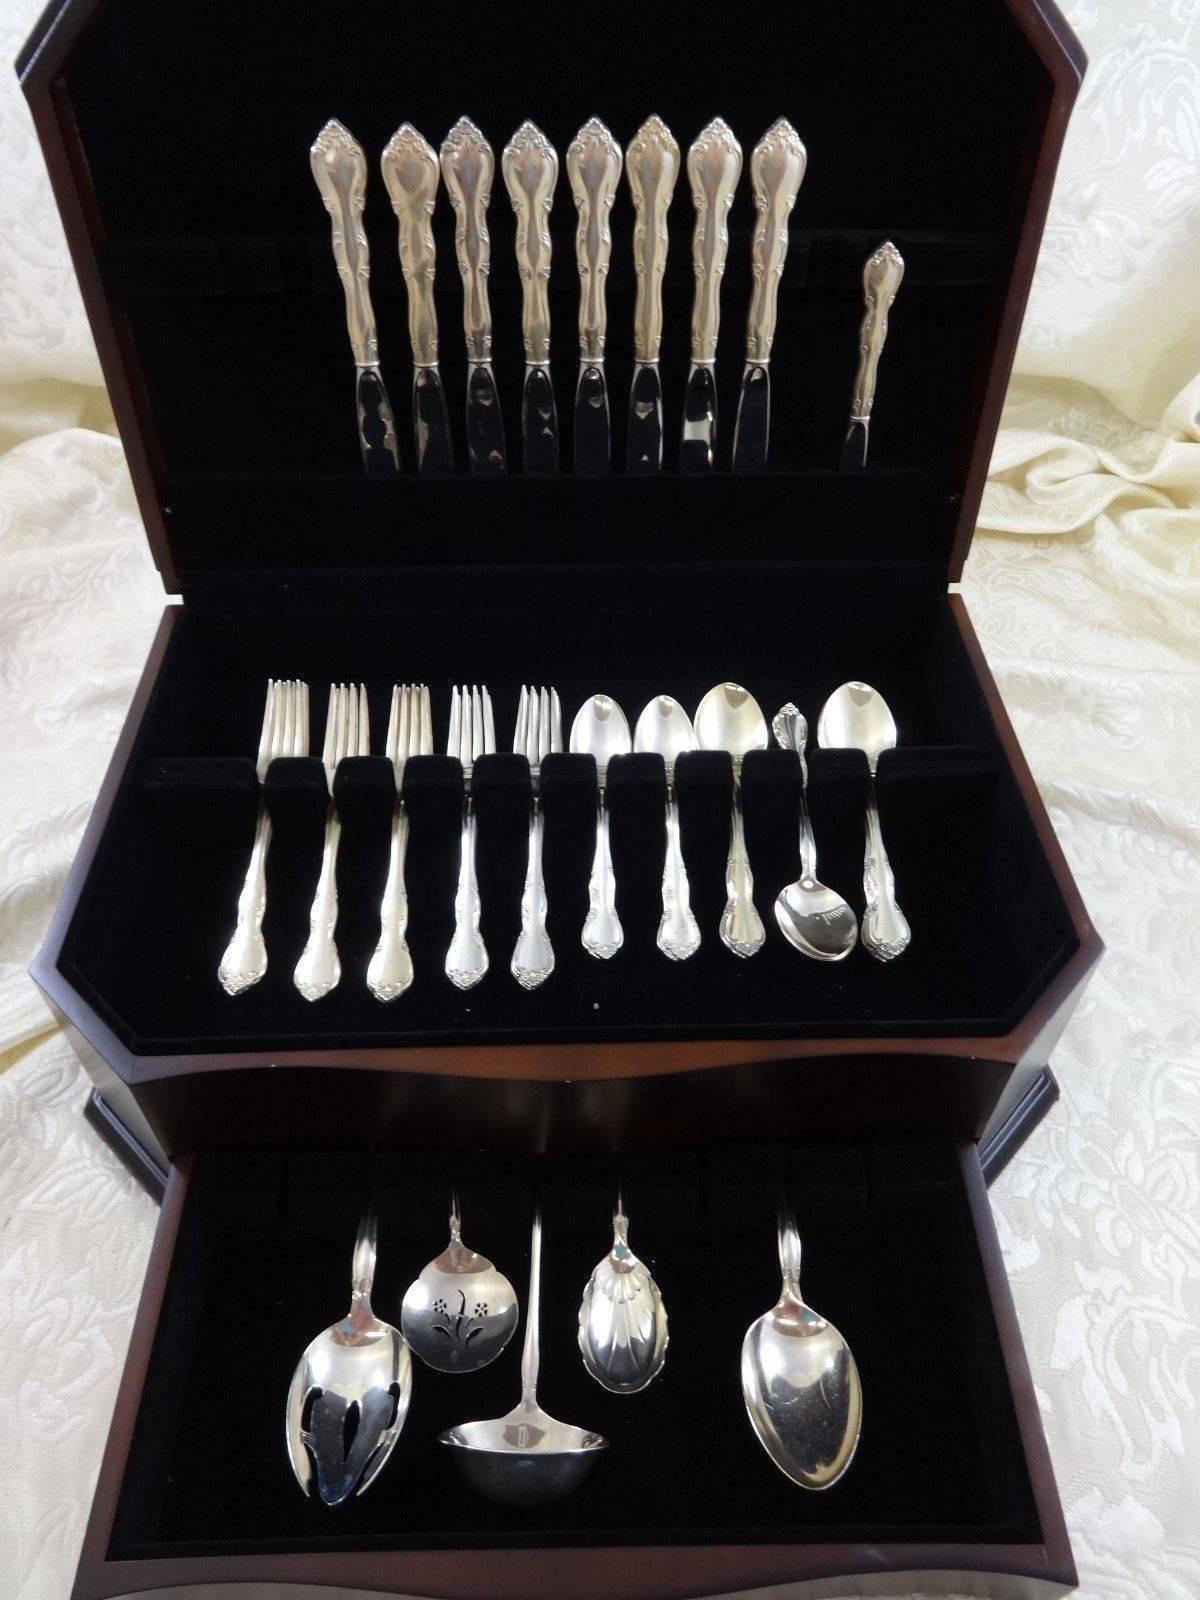 Rose Tiara by Gorham sterling silver flatware set, 46 pieces. This set includes: 

Eight knives, 9